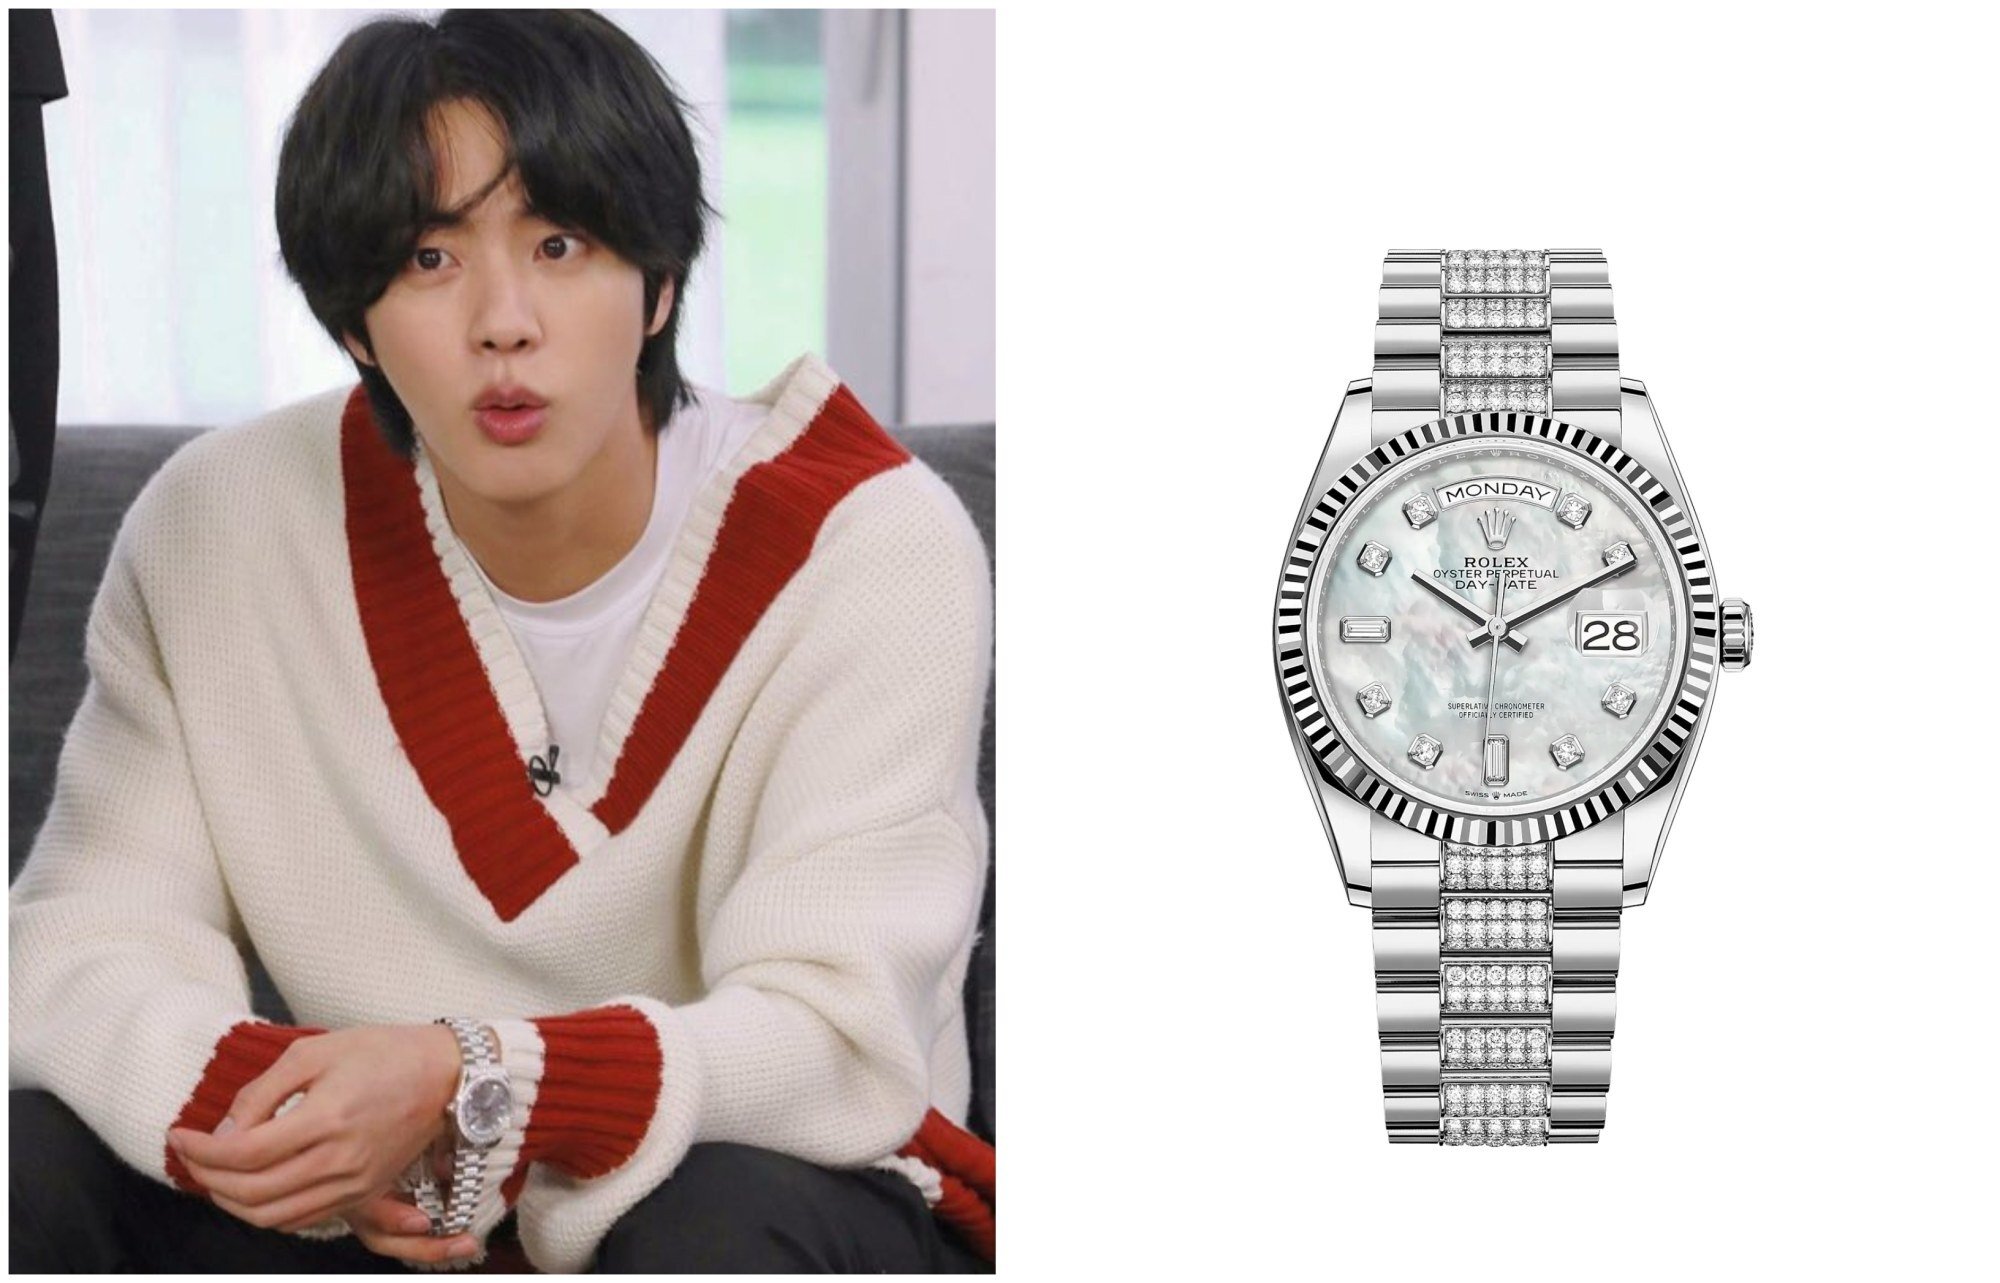 6 K-pop idols who are 'human luxury brands', from BTS' V and Exo's